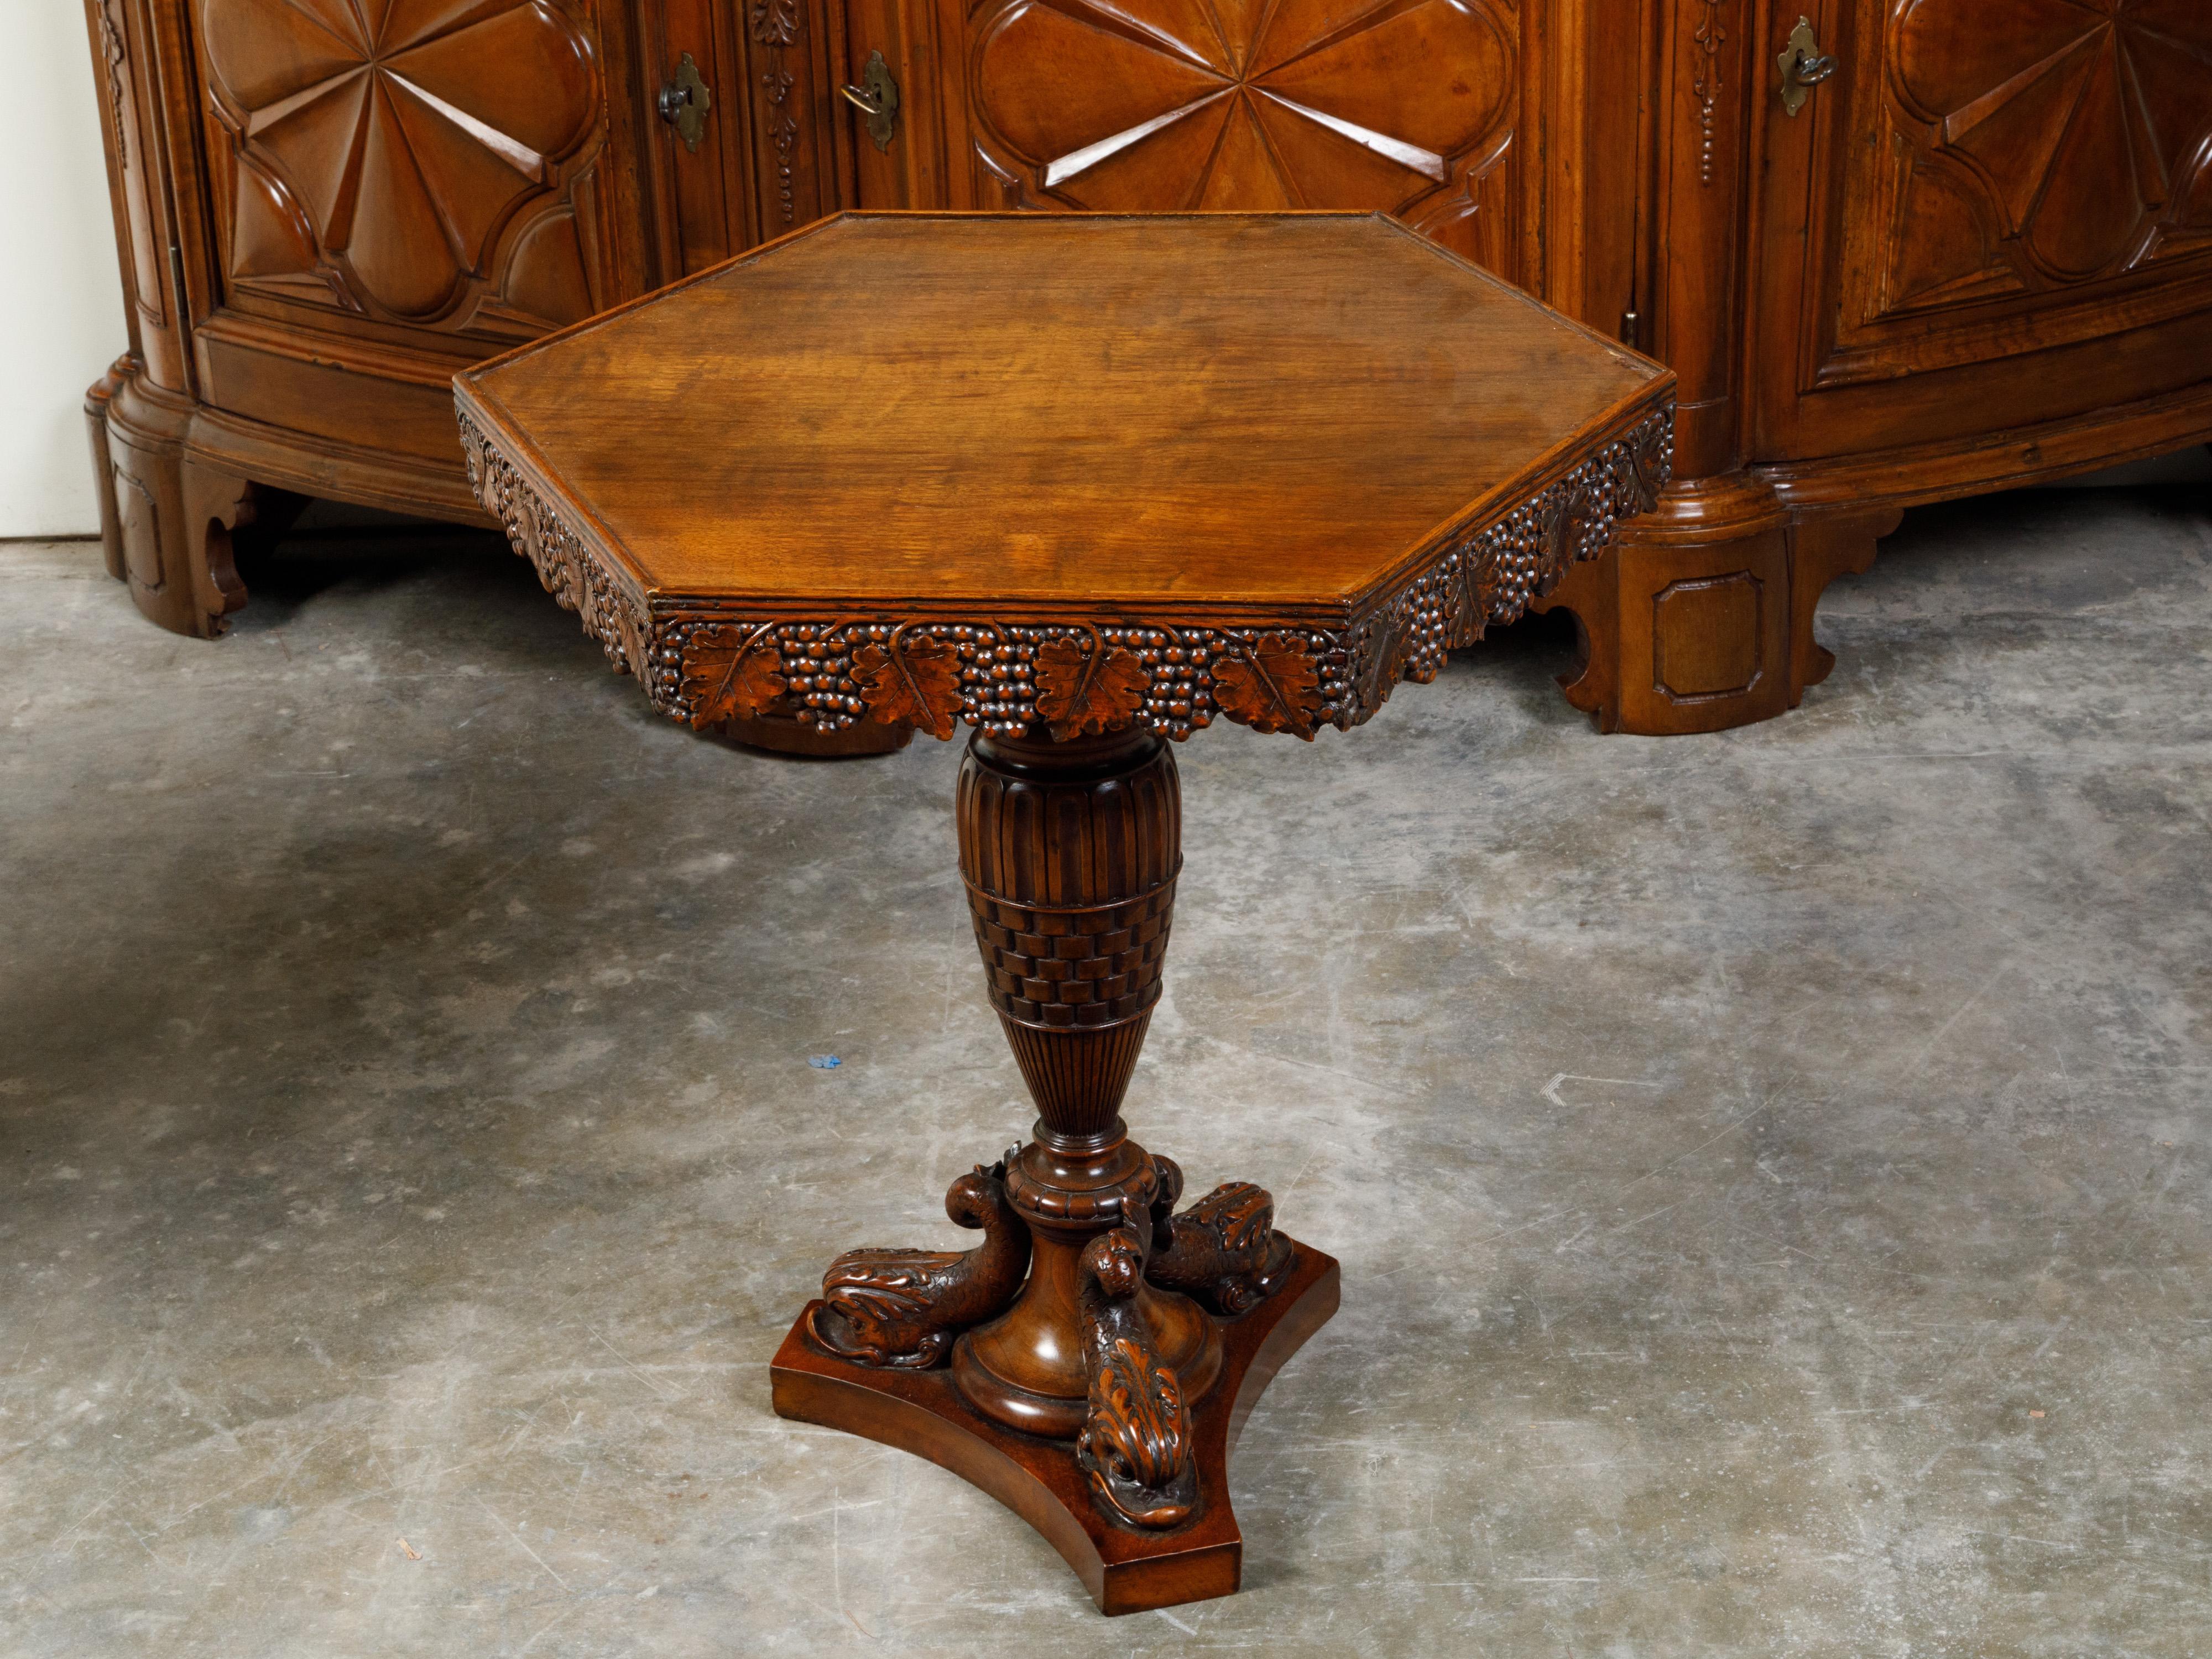 An English walnut side table from the 19th century, with hexagonal top, grape vine carved apron and dolphin motifs. Created in England during the 19th century, this walnut side table features an hexagonal top beautifully adorned with grapes and vine